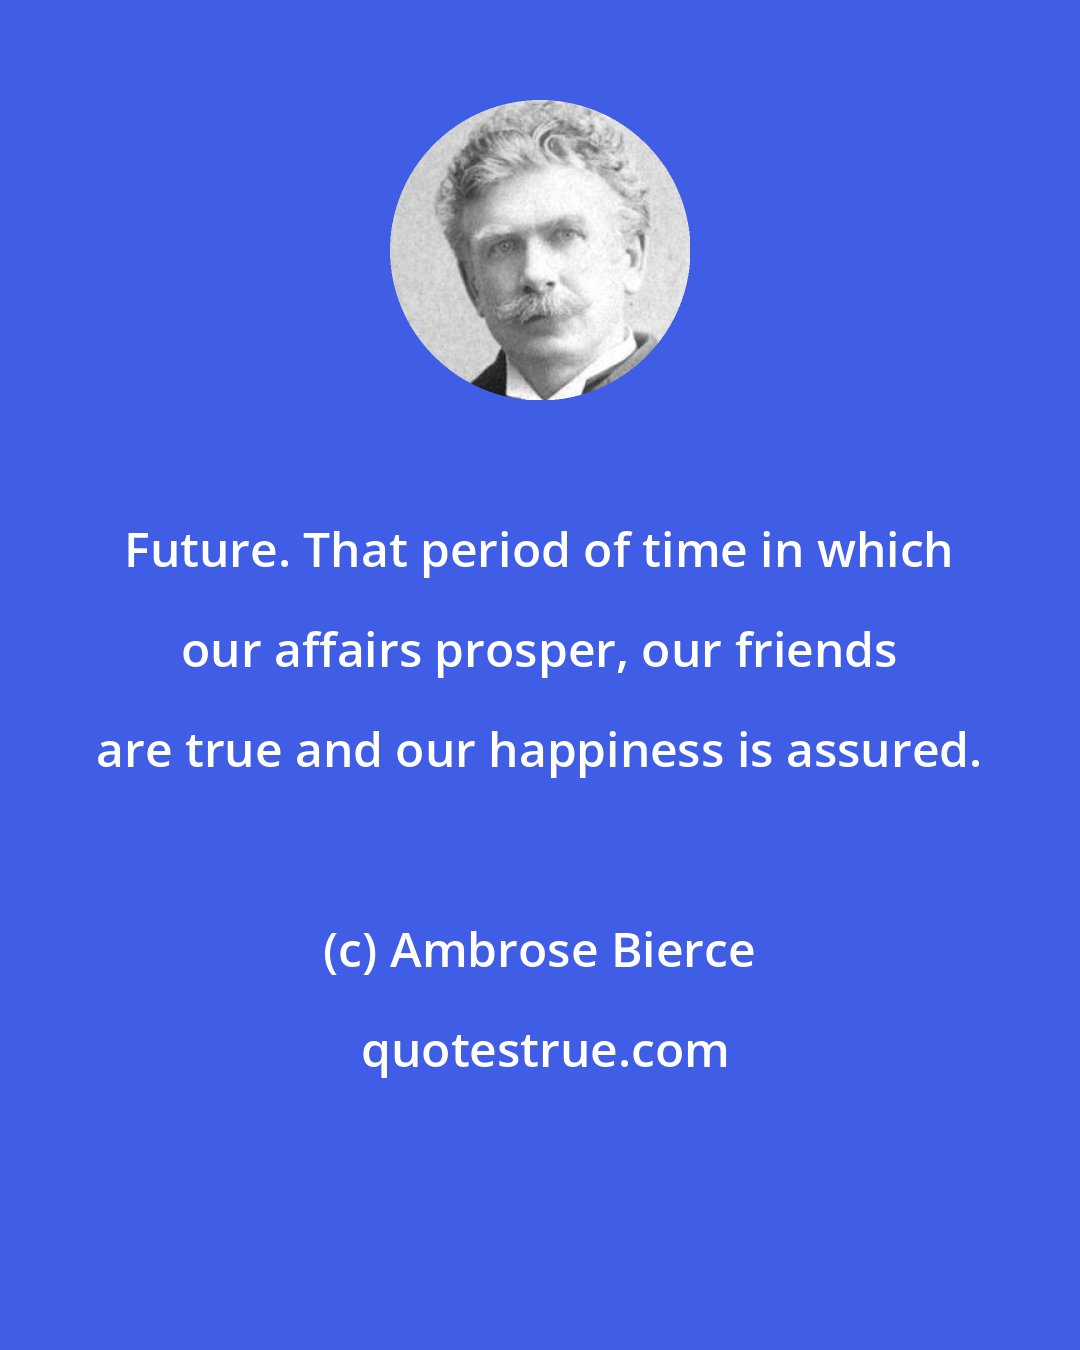 Ambrose Bierce: Future. That period of time in which our affairs prosper, our friends are true and our happiness is assured.